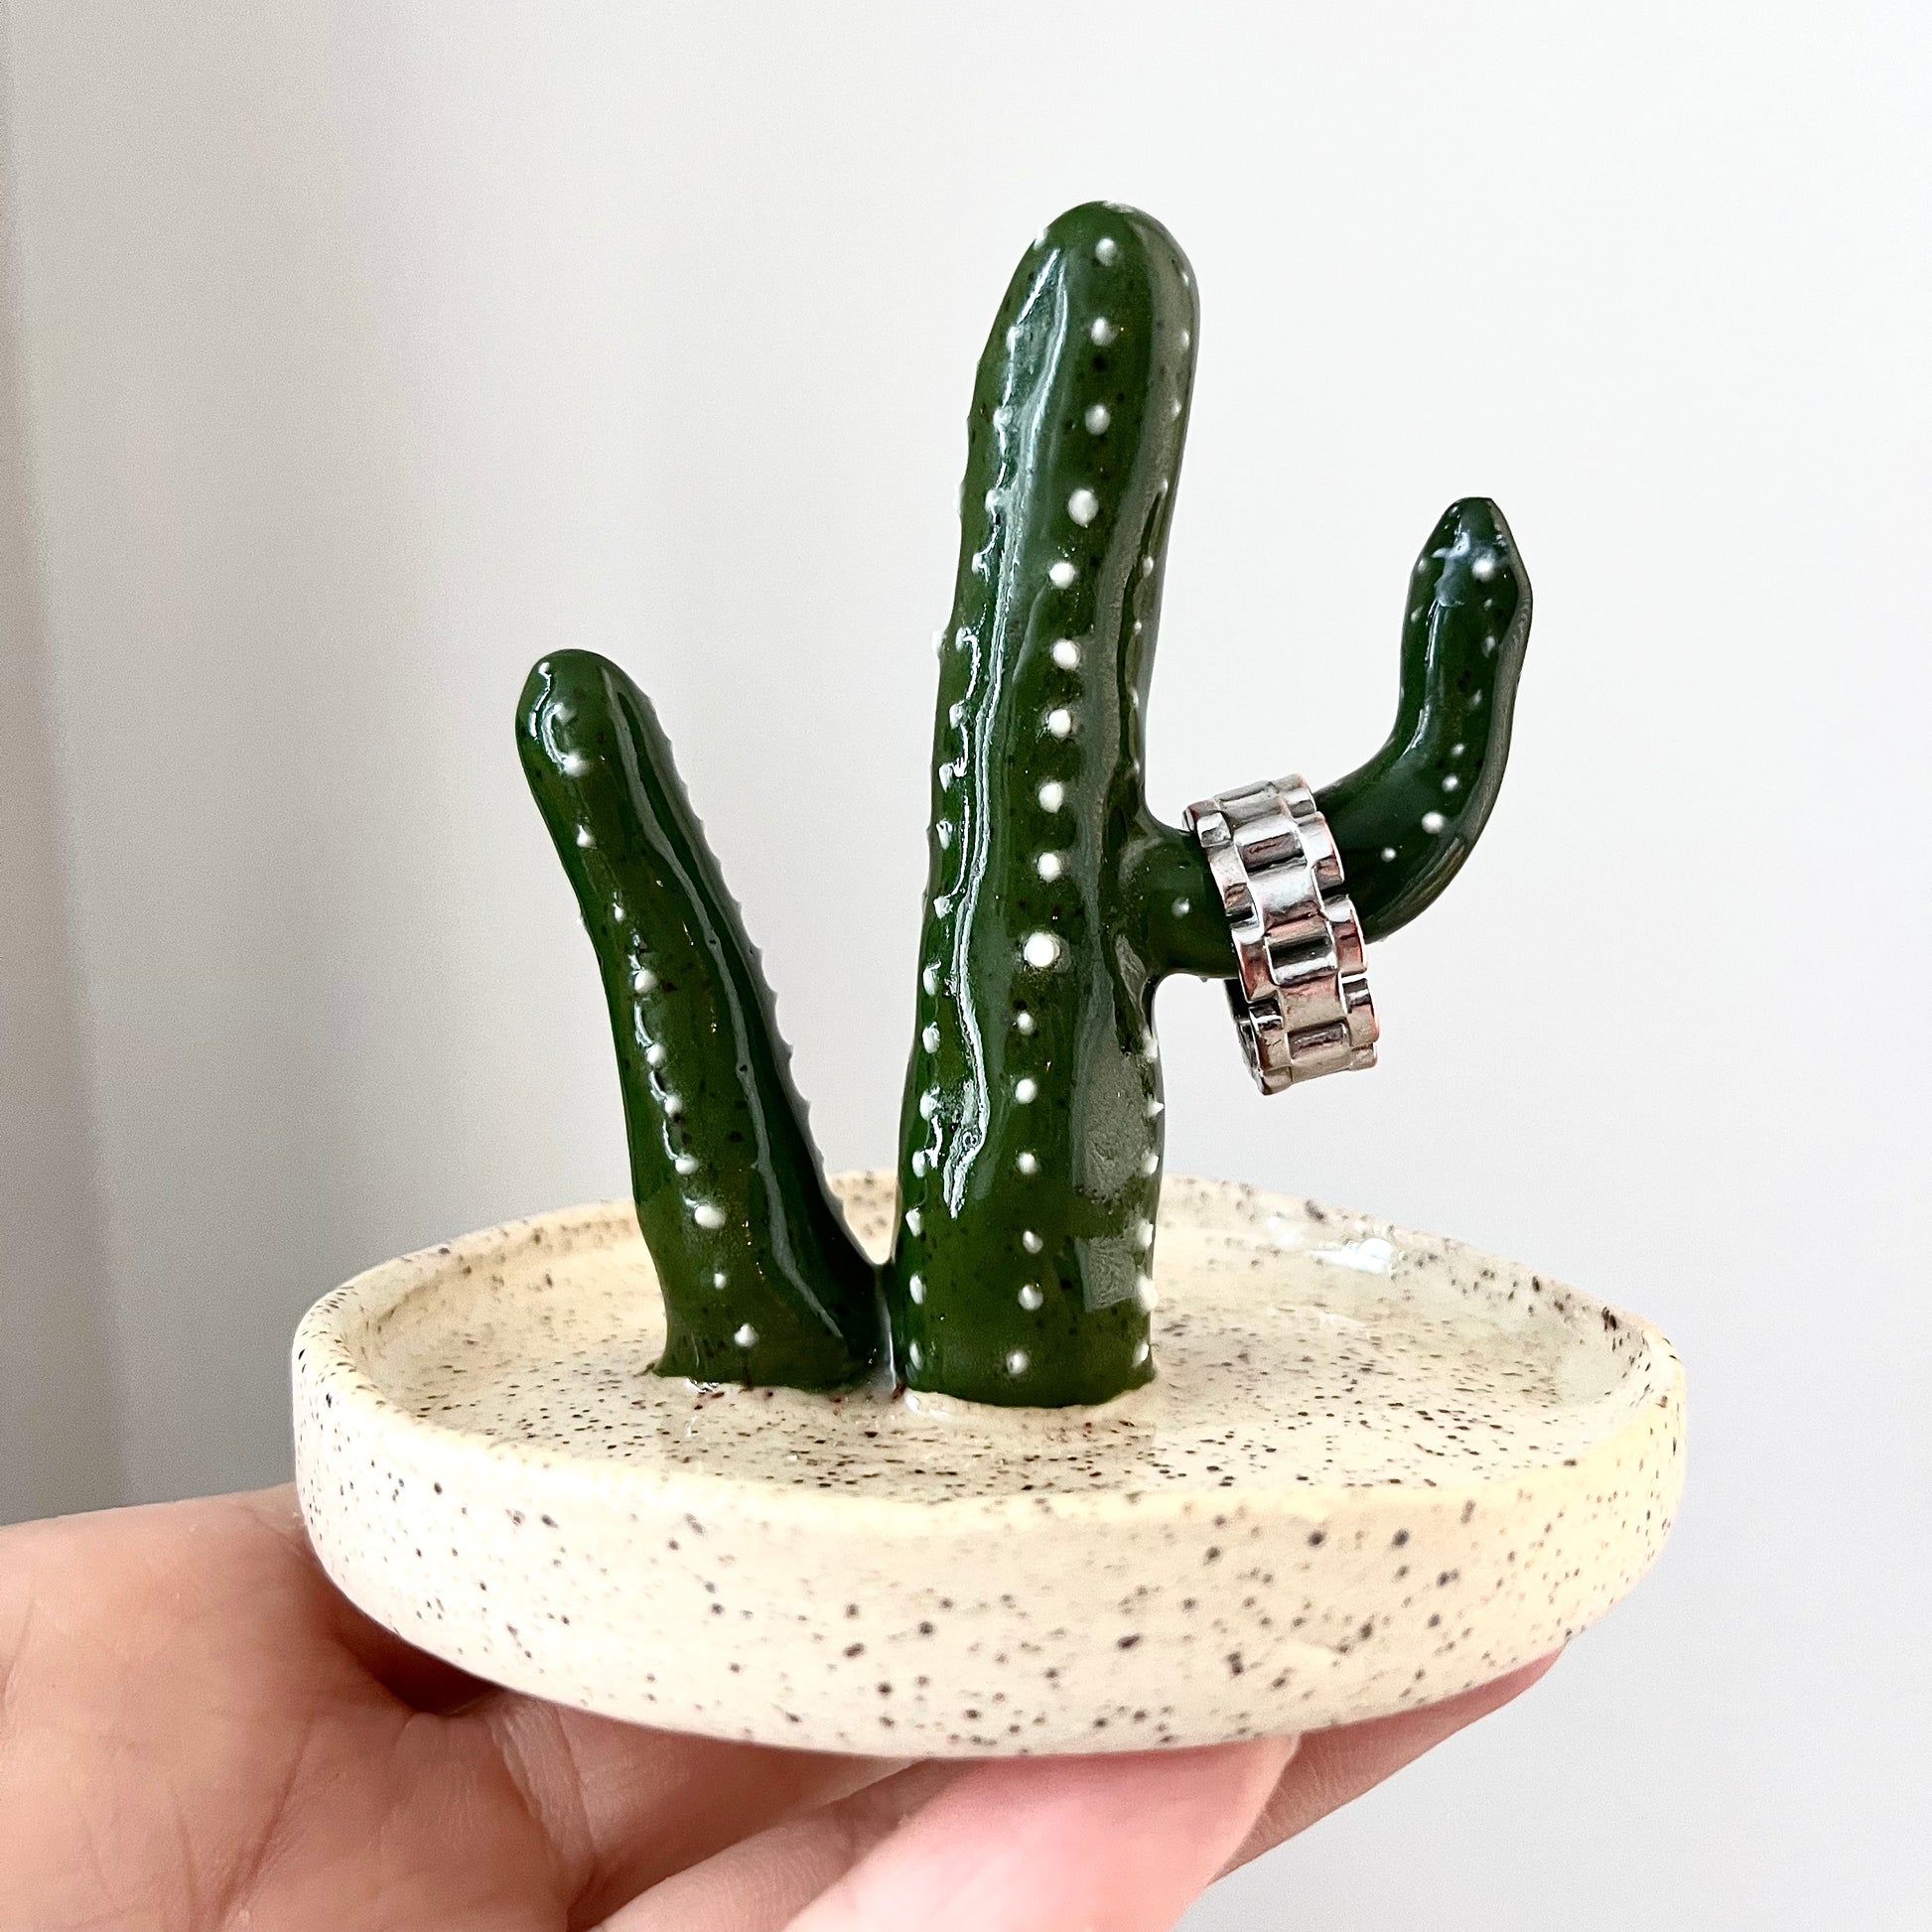 Porcelain Cactus Jewelry Holder - Homestead Timbers